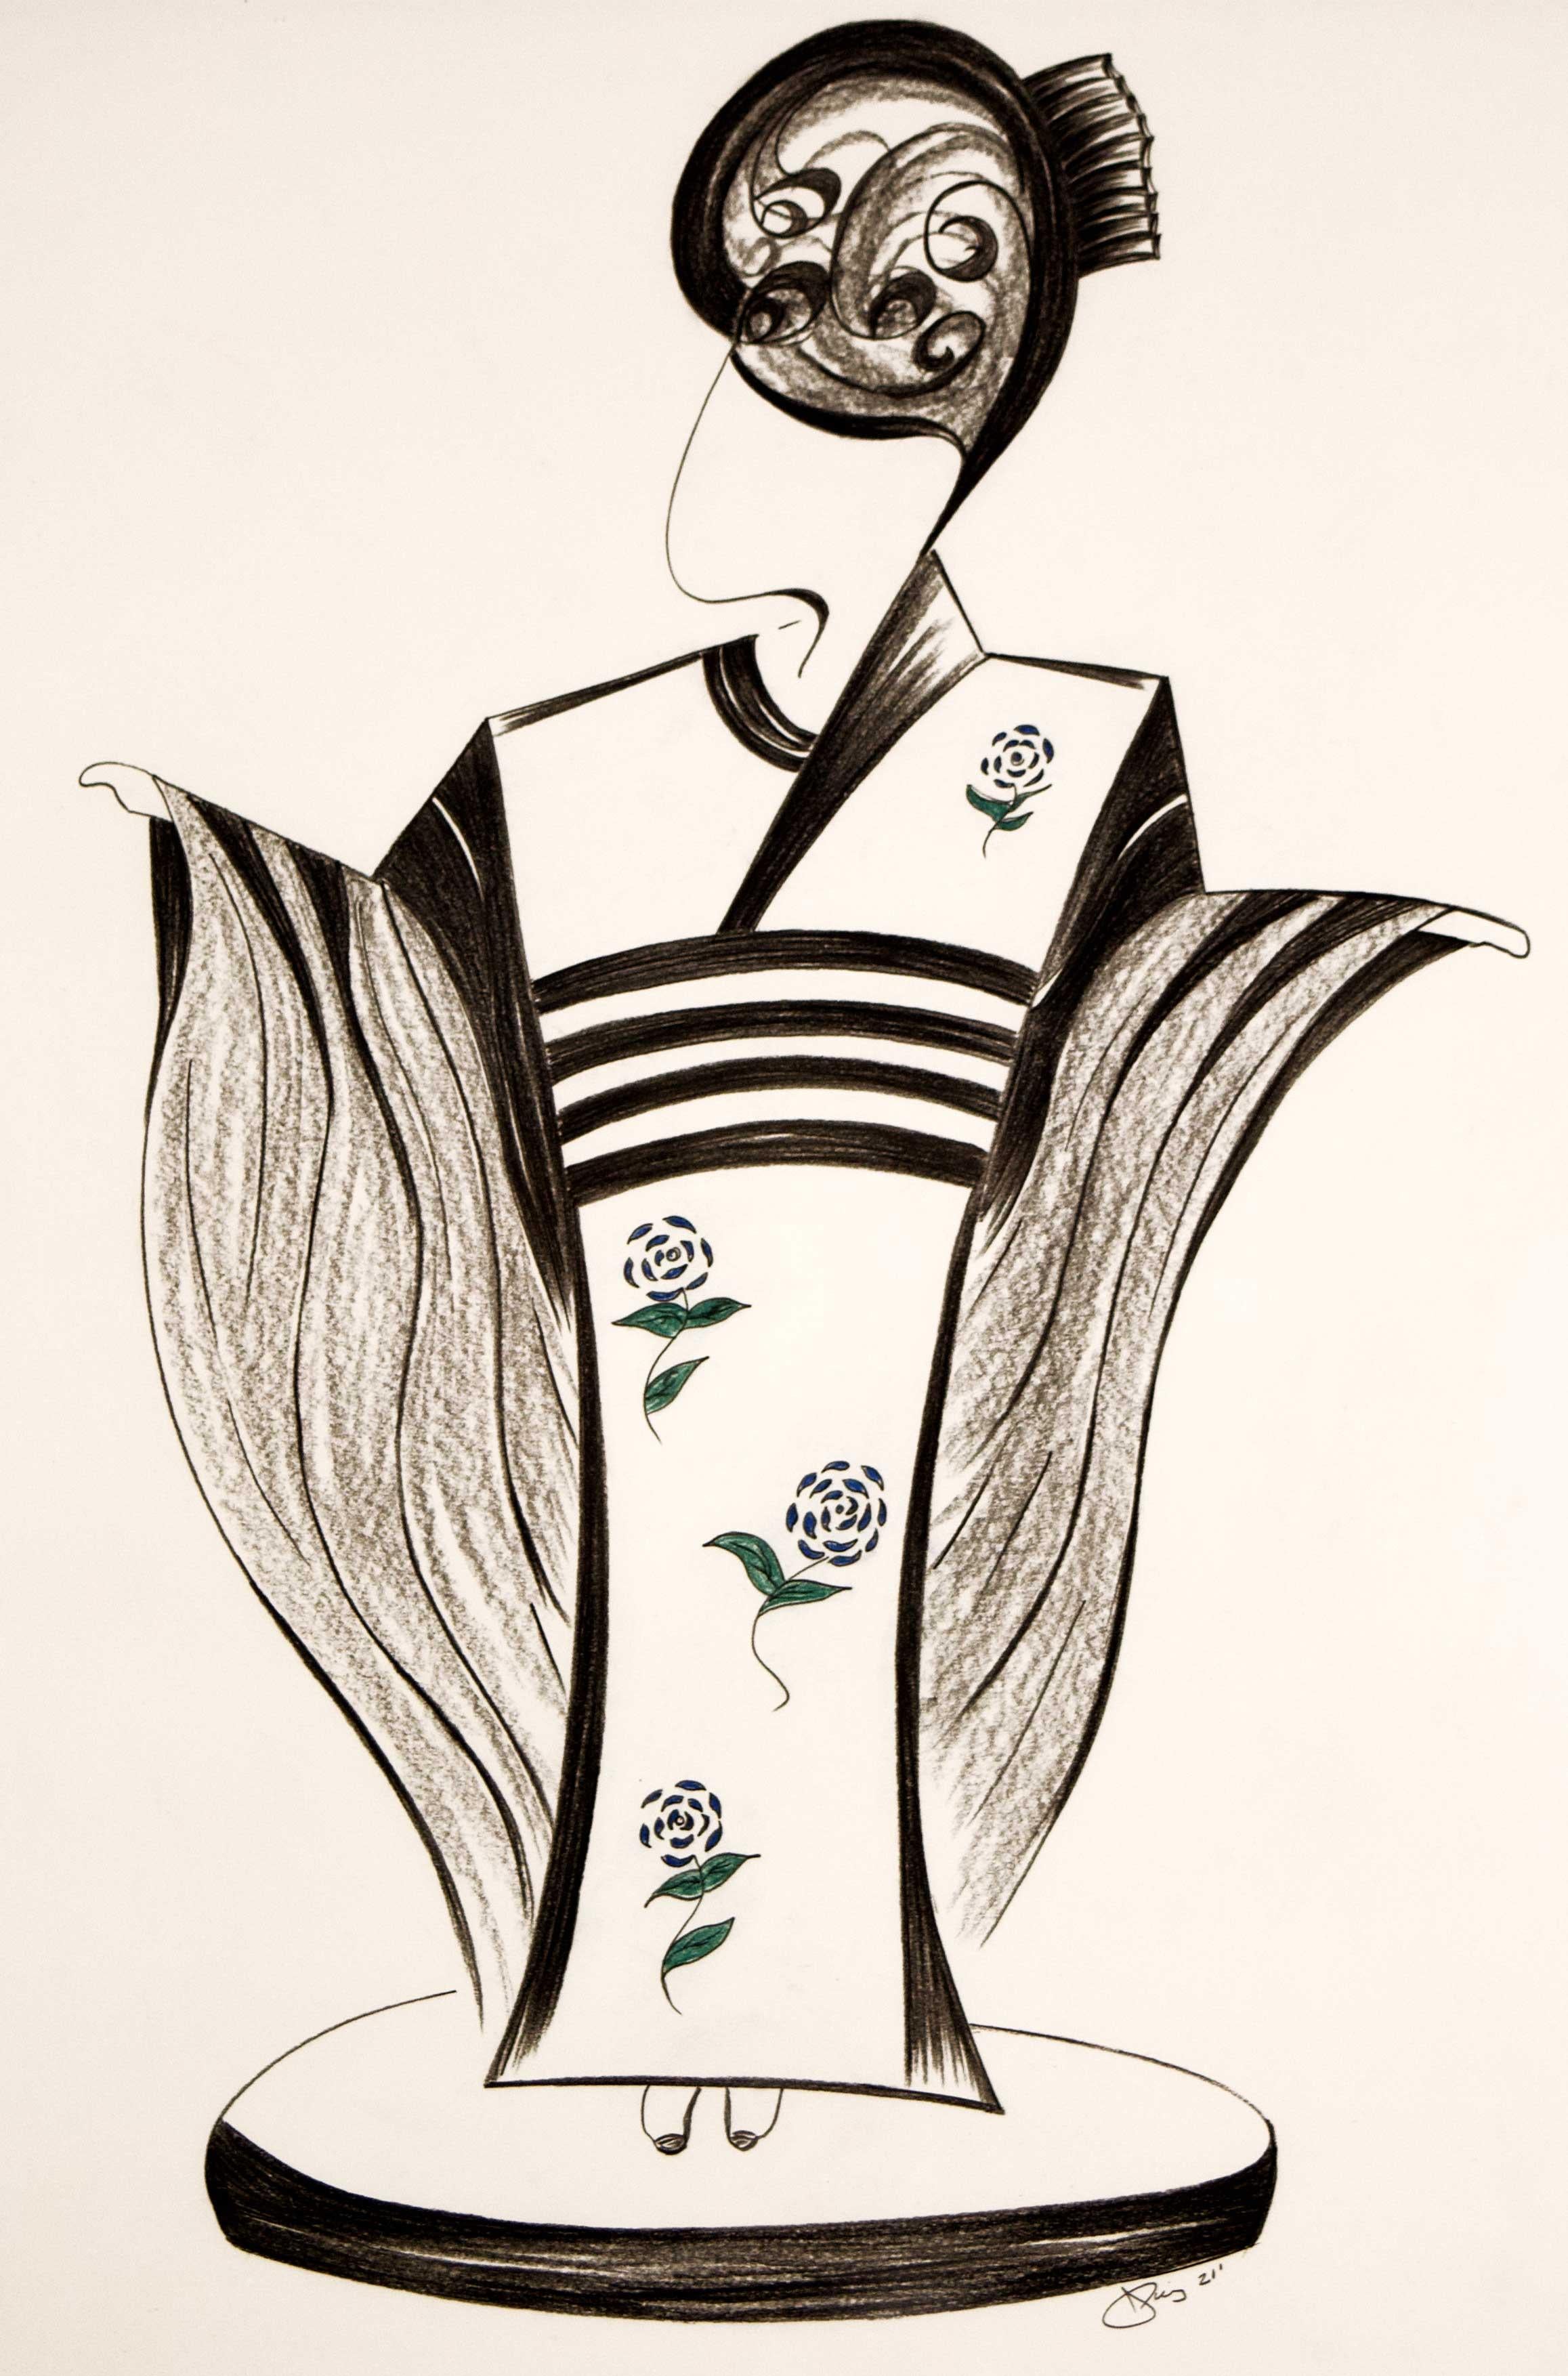 'Ode to Mineko Iwasaki (1970s Japanese Geisha)' is an original charcoal drawing by the American artist Jorge Ruiz-Martinez. The artist works in an art deco style, imagining graceful figures in historic costume through that stylized lens. Art Deco